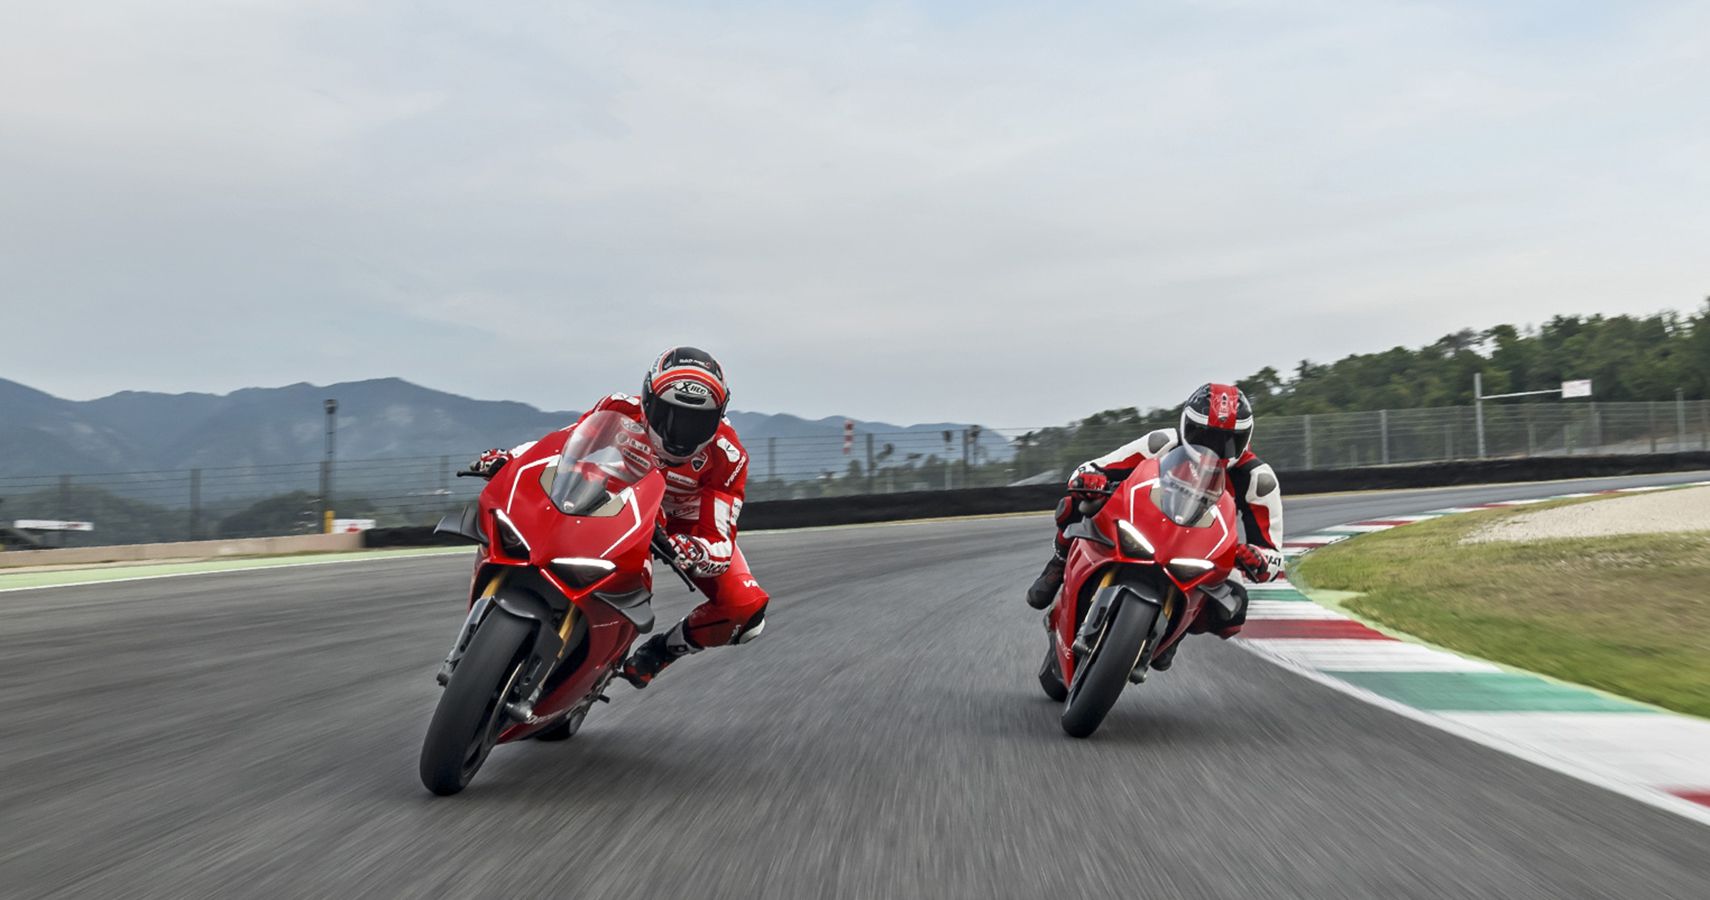 Ducati Panigale V4 R racing on track